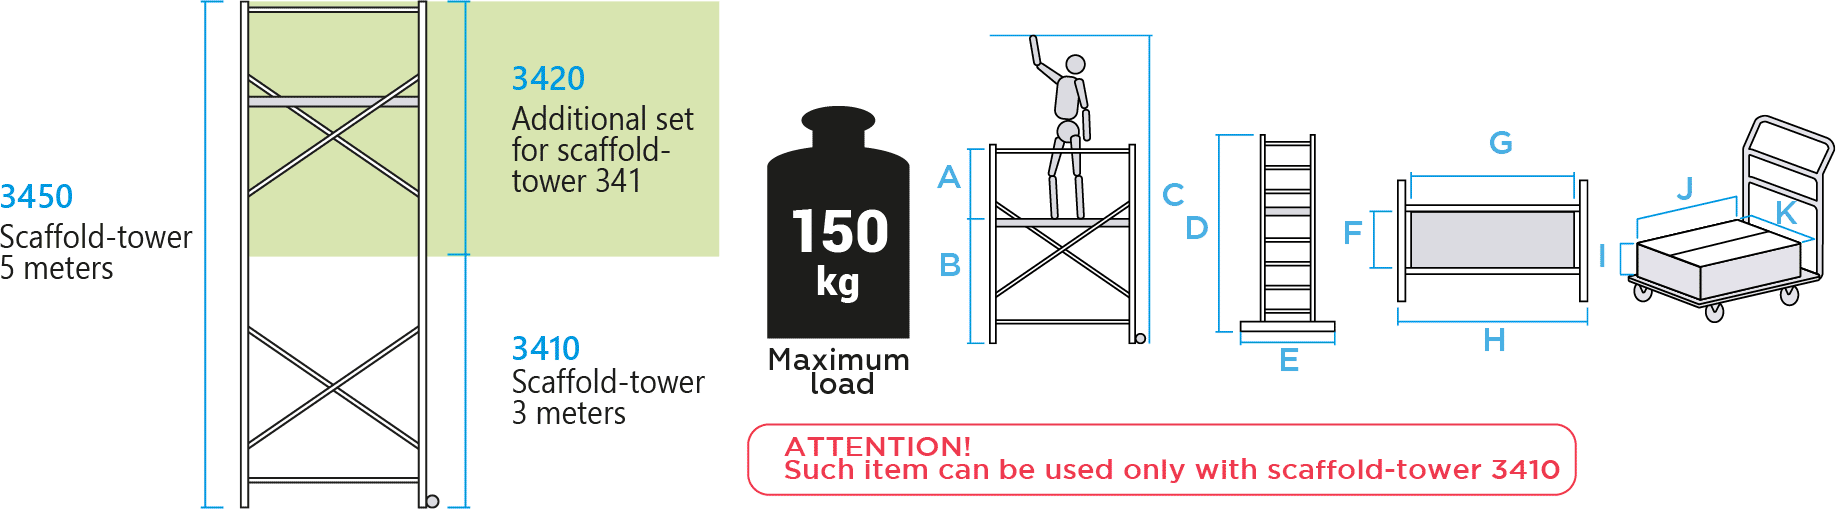 Schema: Additional set for extending the scaffold NV3410 working height up to 5.1 meters NV3420